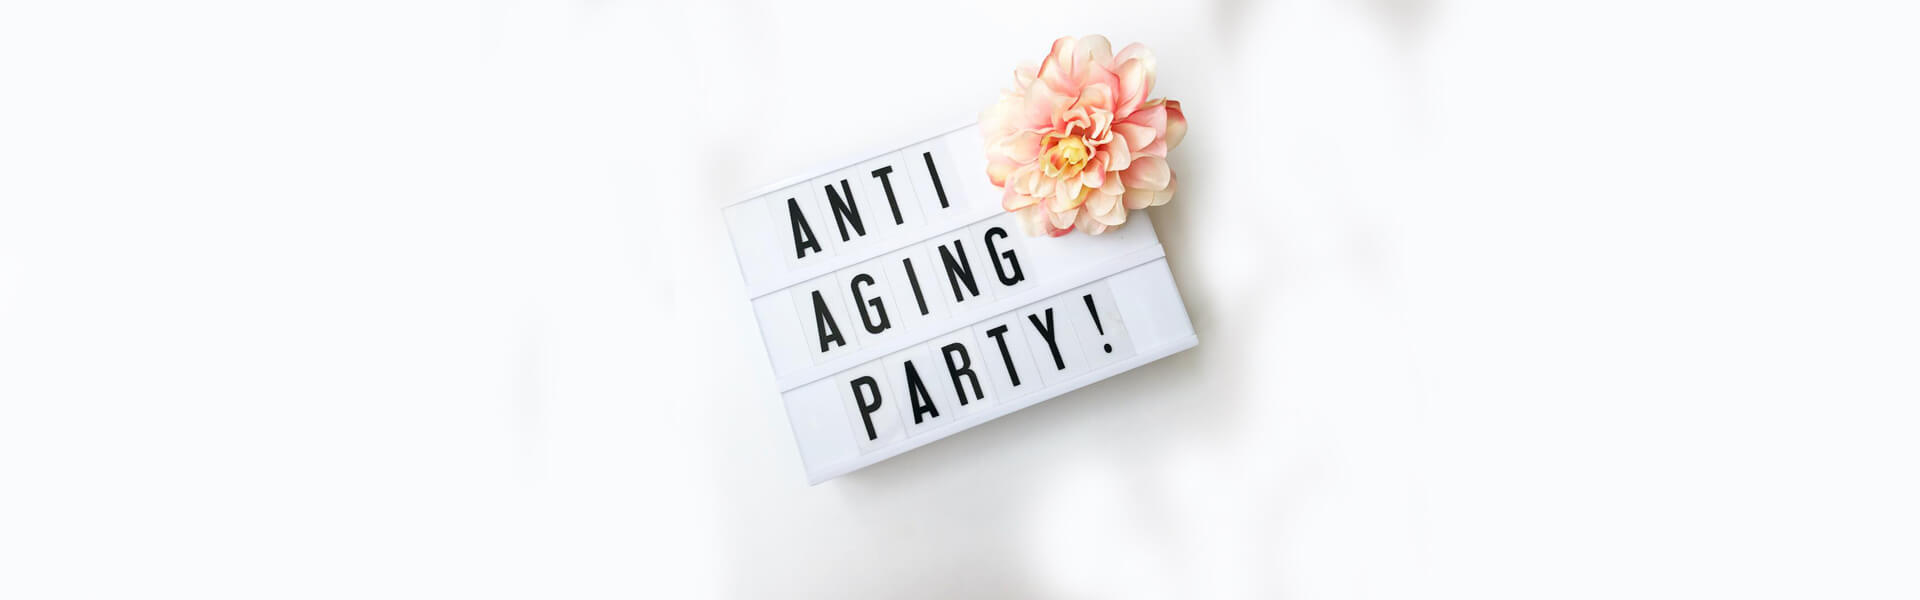 anti-aging-launch-party-image